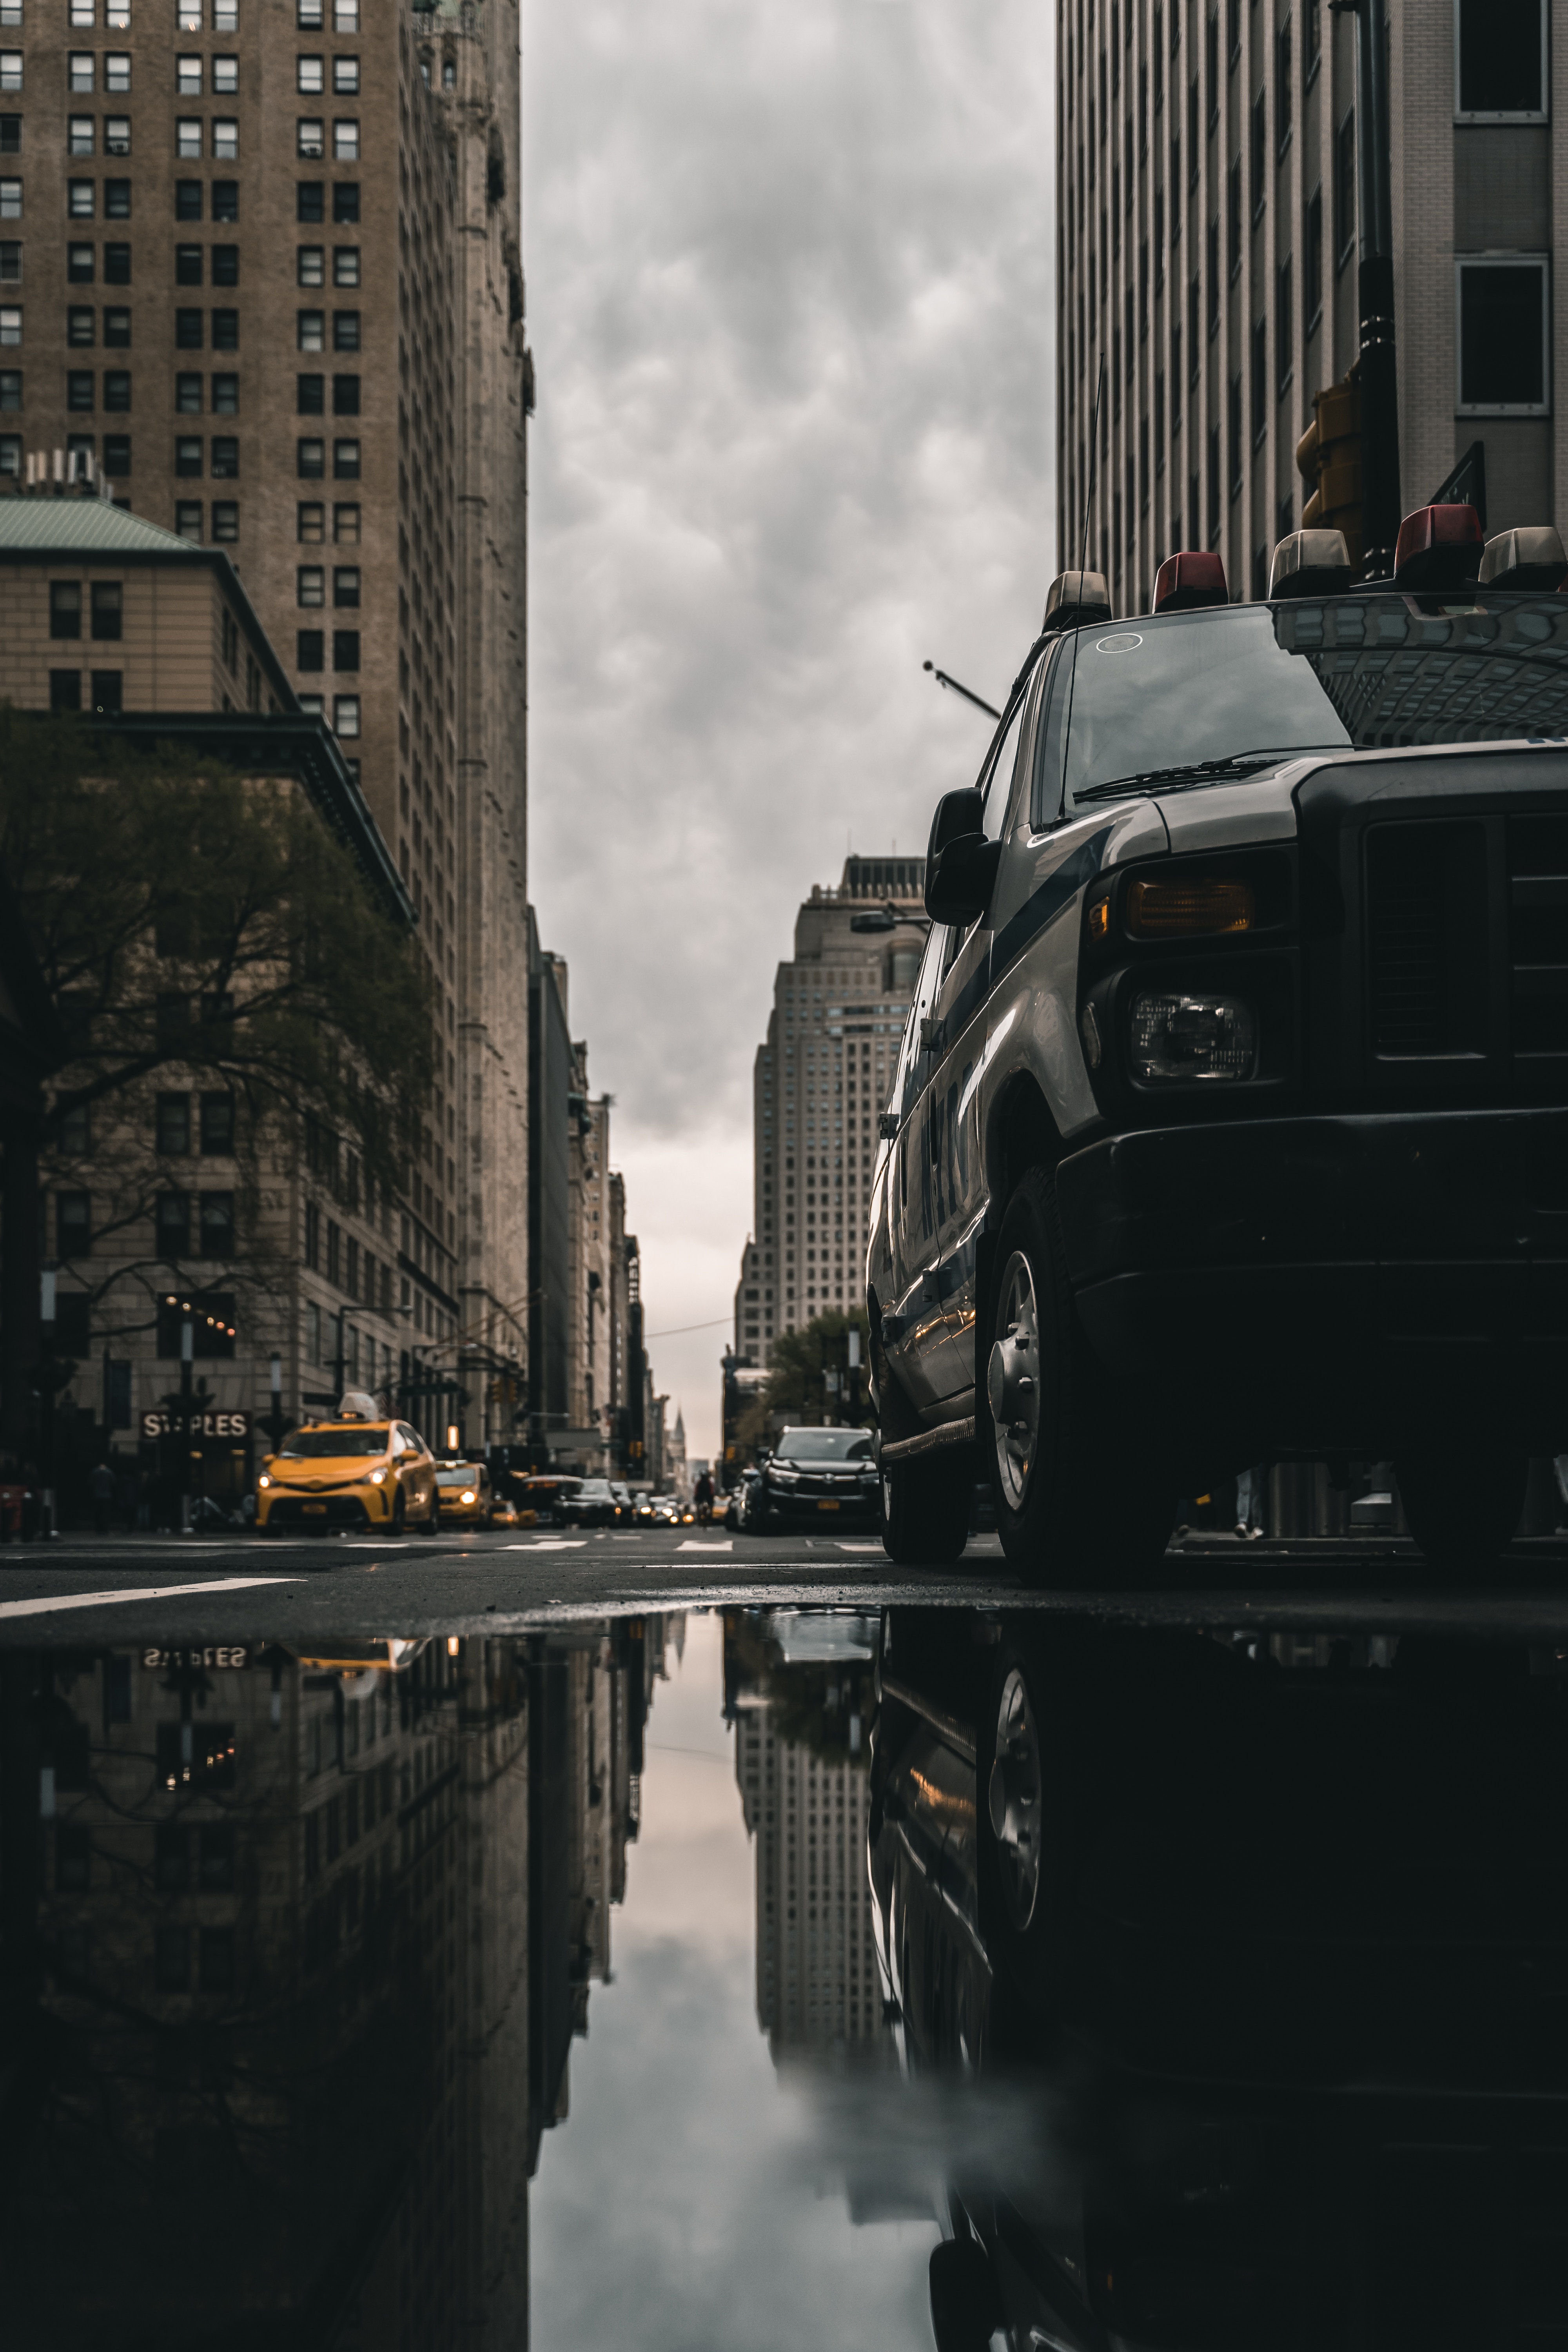 reflection, asphalt, street, cities, building, cars, puddle iphone wallpaper